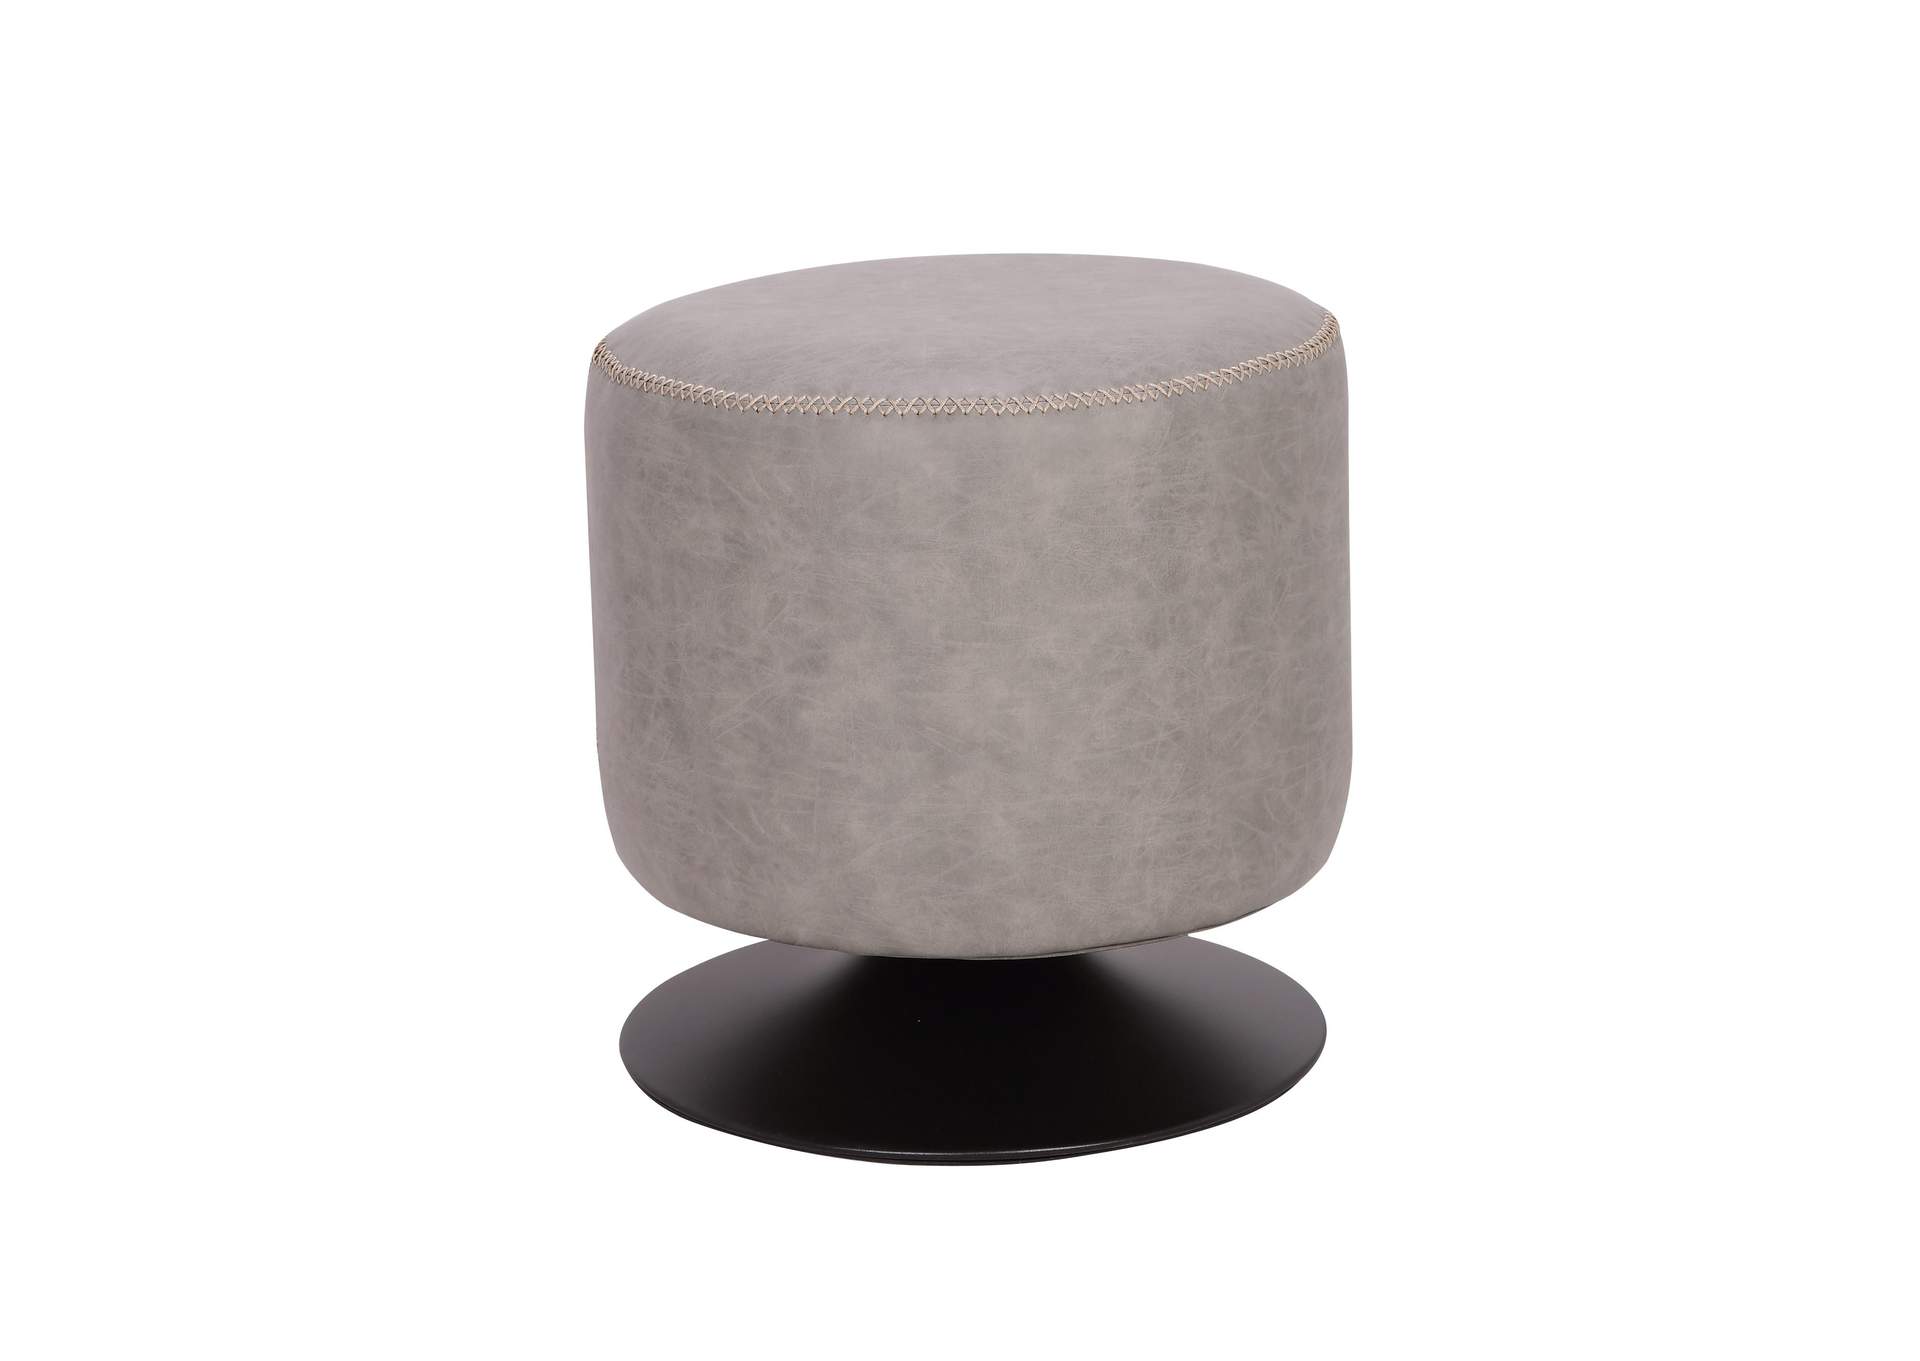 Matte Black Round Vintage Upholstered Ottoman,Chintaly Imports